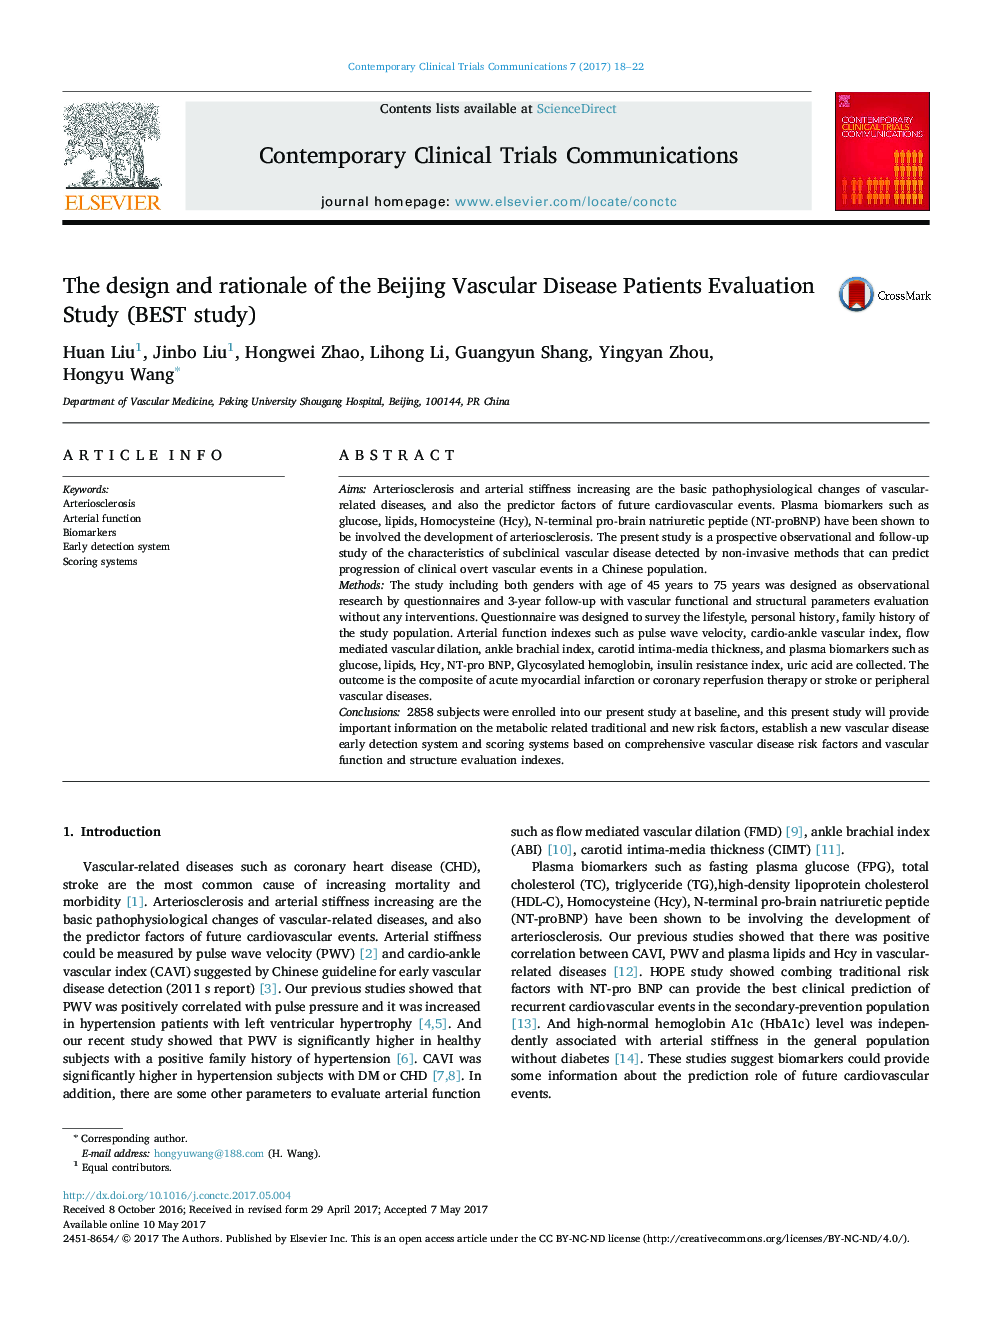 The design and rationale of the Beijing Vascular Disease Patients Evaluation Study (BEST study)